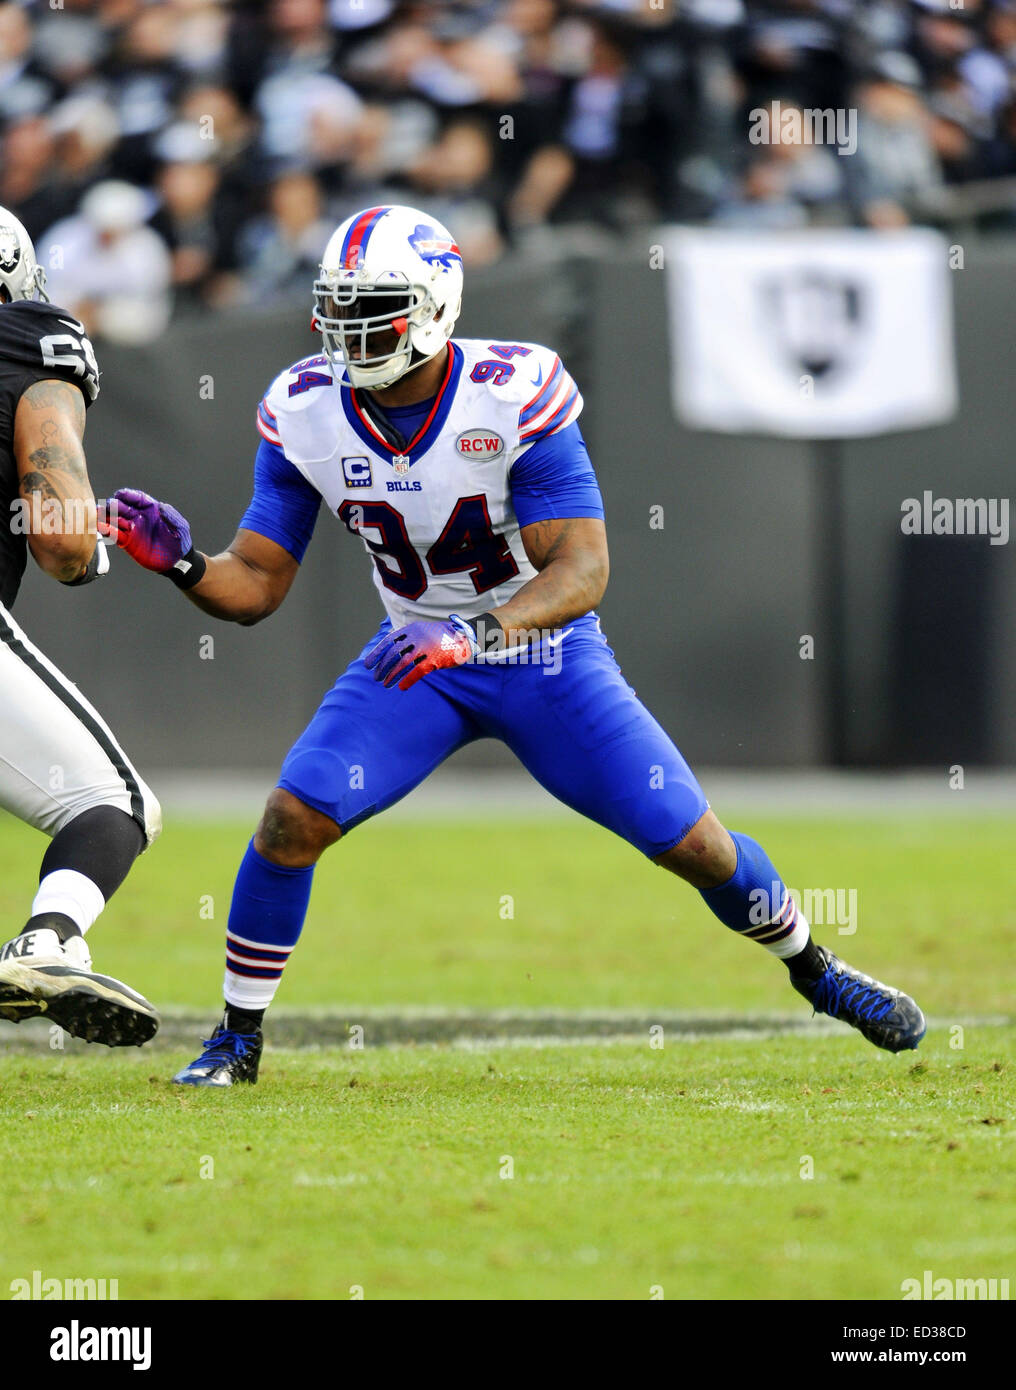 December 21 2014. Mario Williams of the Buffalo Bills in action during a  26-24 loss to the Oakland Raiders at the O.co Coliseum in Oakland,  California. John Pyle/Cal Sport Media Stock Photo -